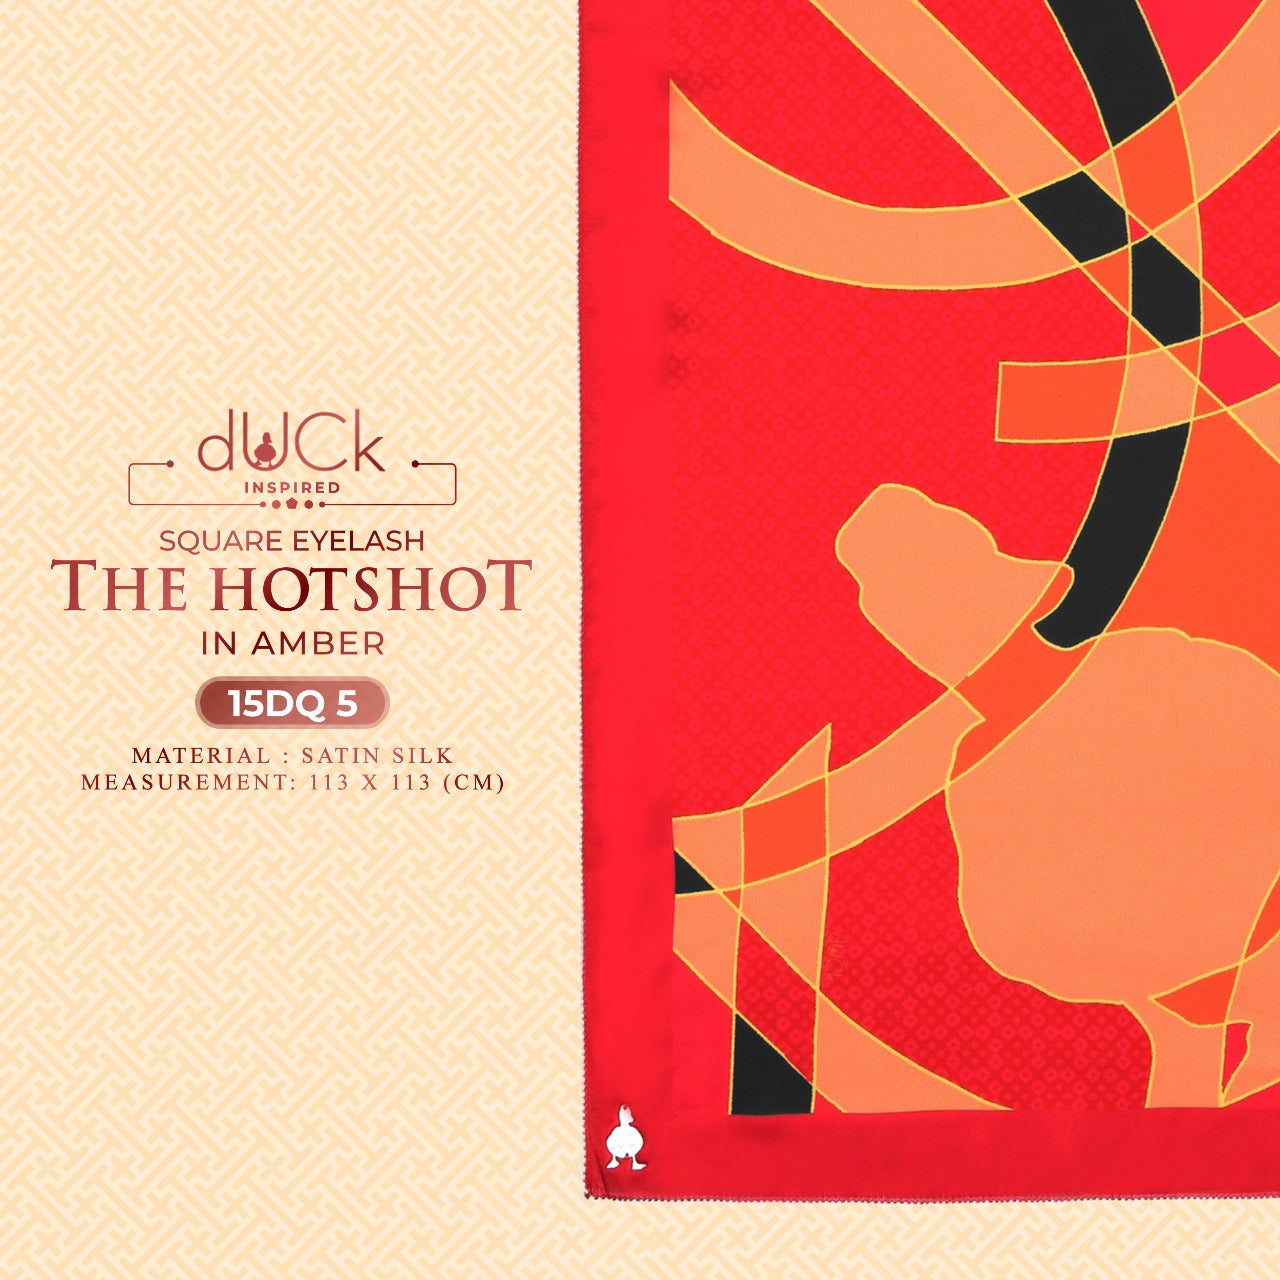 The Hotshot dUCk Square Eyelash Collection RM14